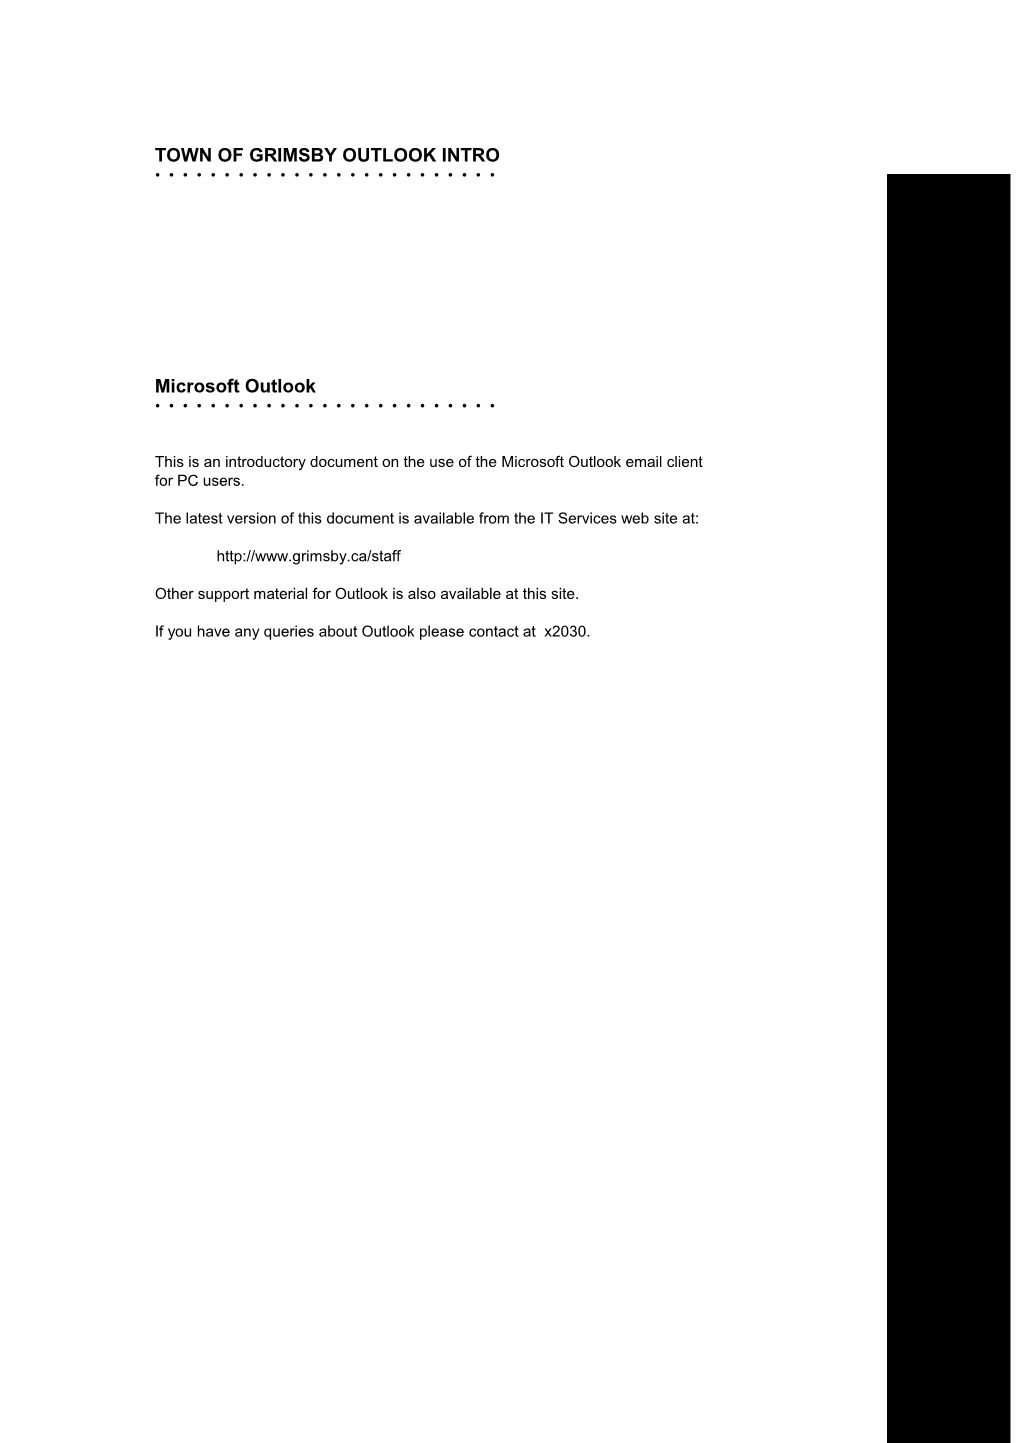 Microsoft Outlook : Getting Started